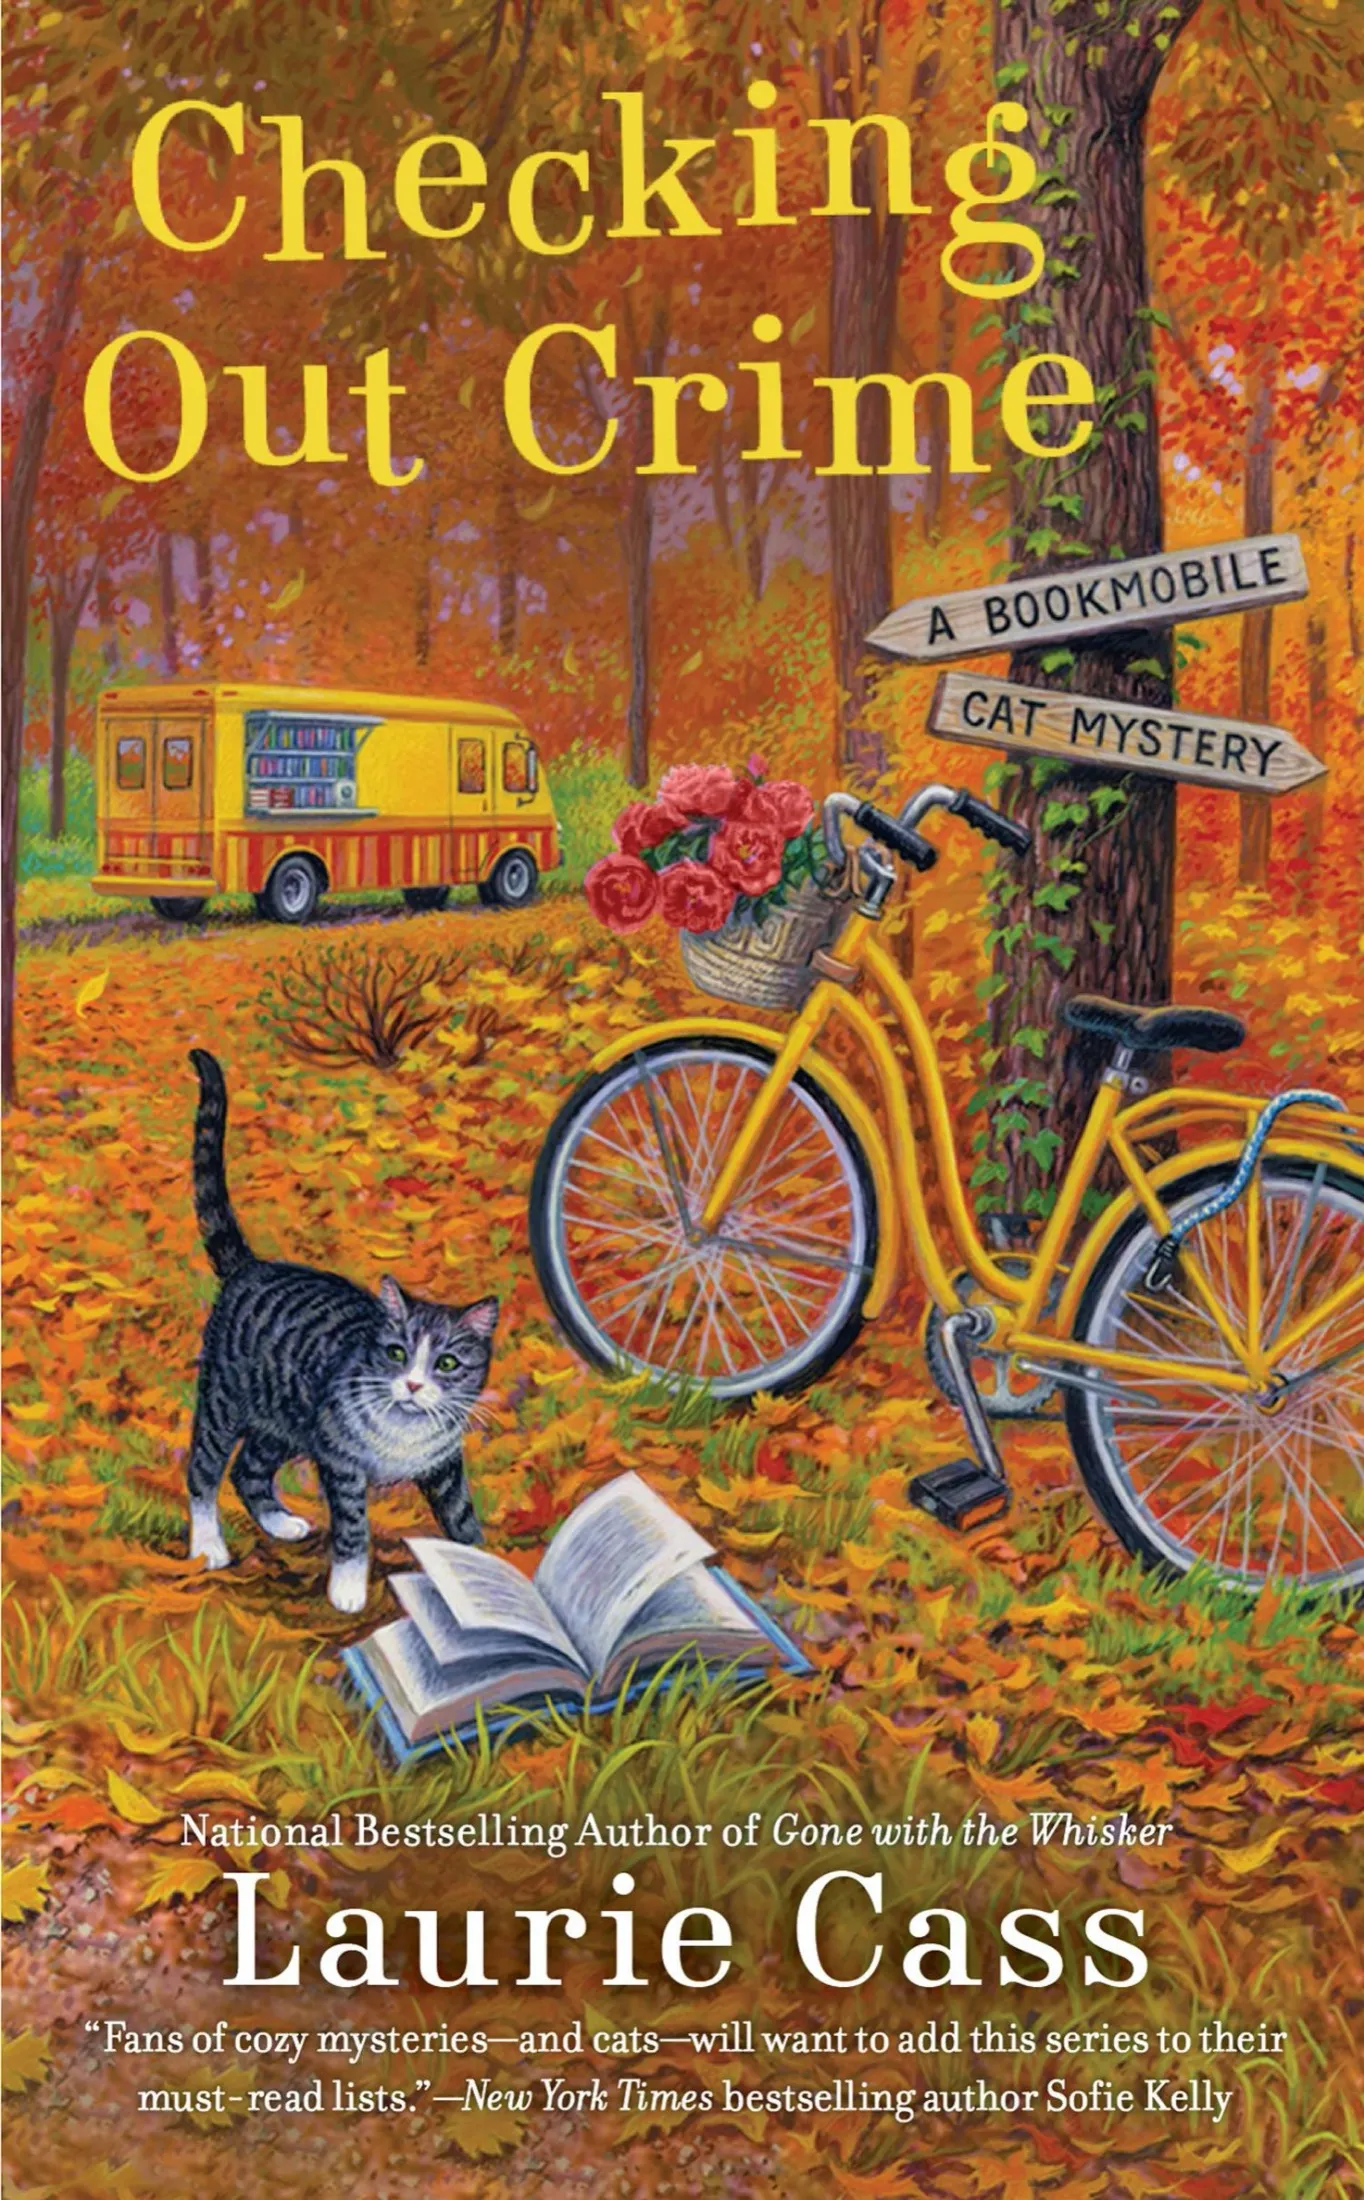 Checking Out Crime (A Bookmobile Cat Mystery #9)